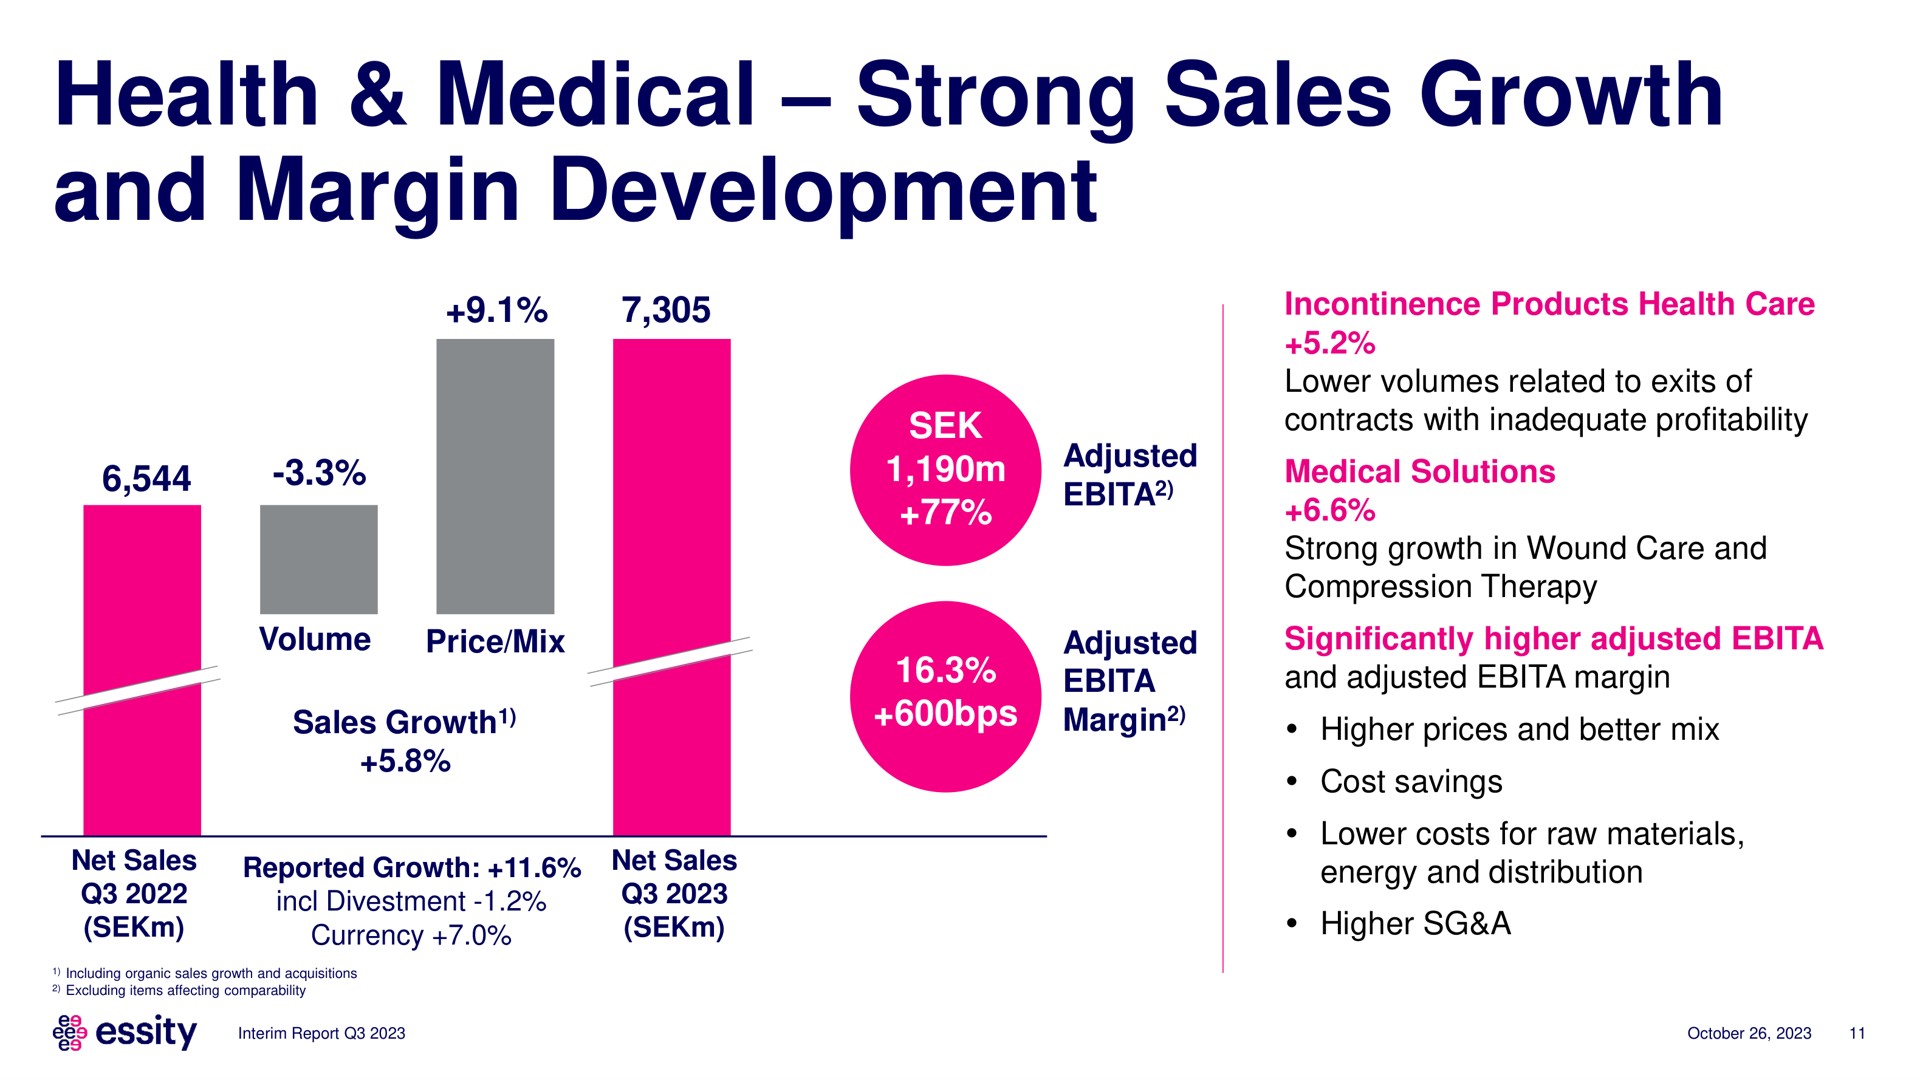 health medical strong sales growth and margin development | Essity